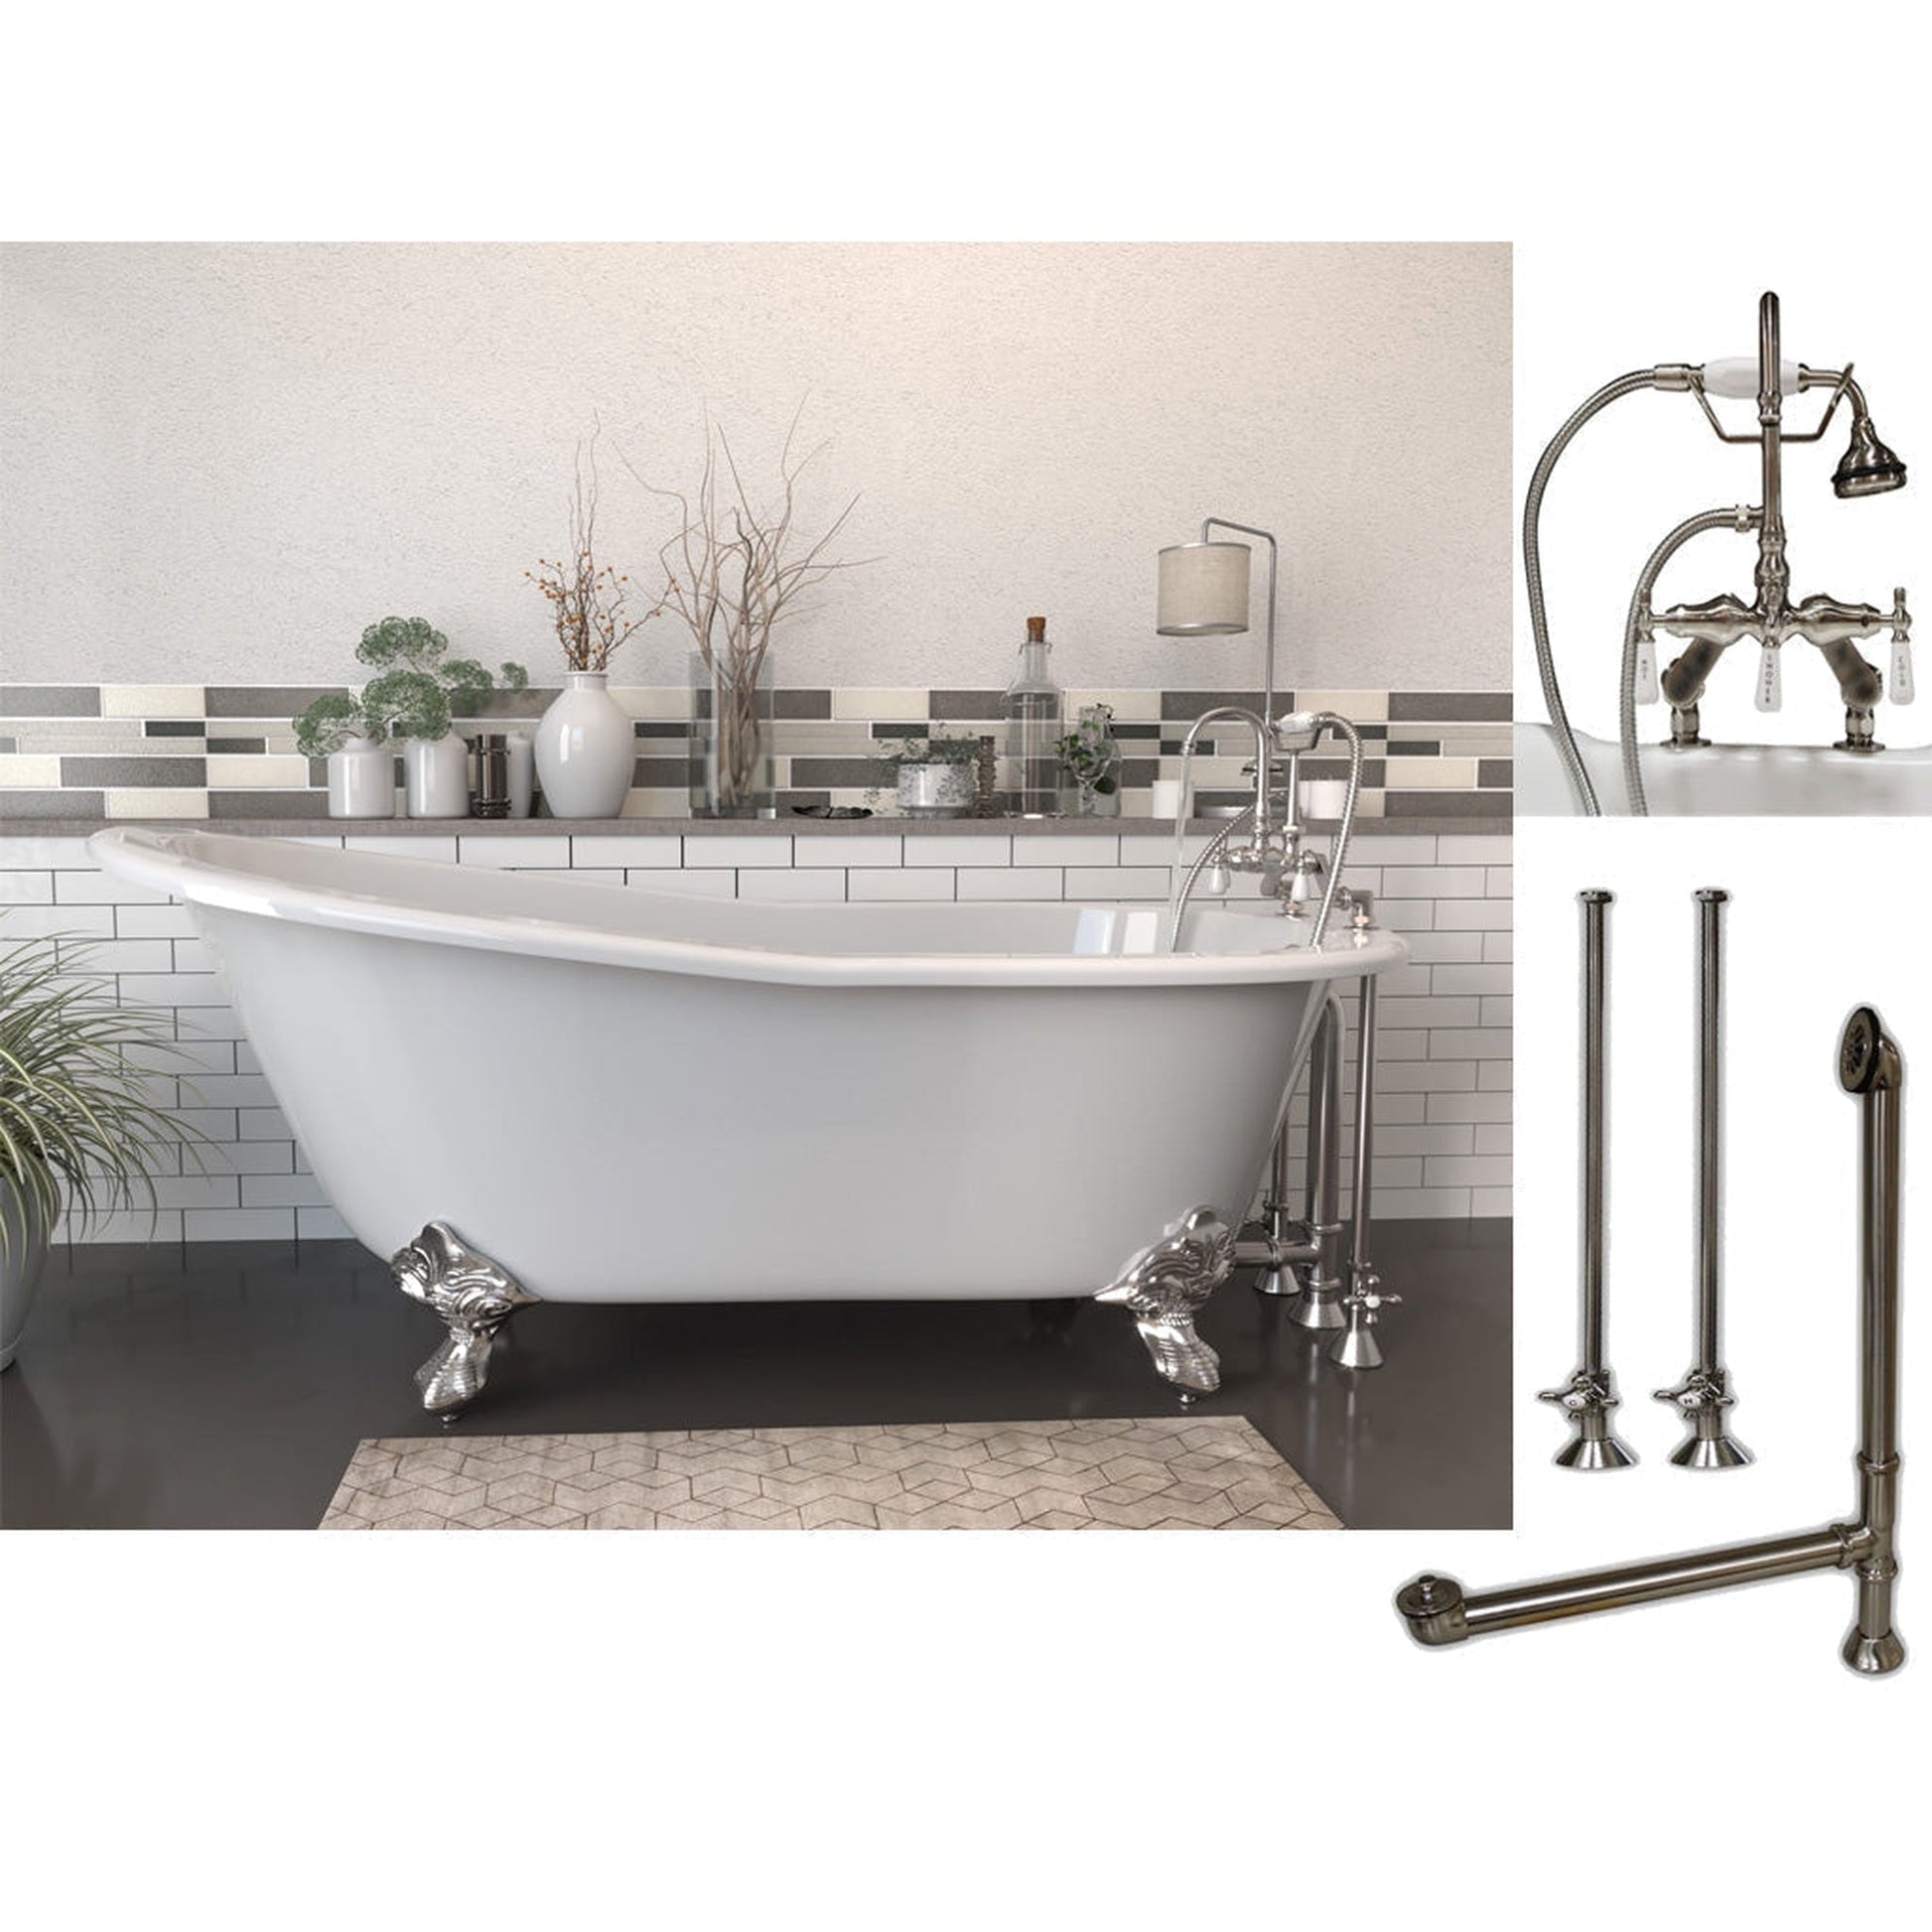 Cambridge Plumbing 67" White Cast Iron Clawfoot Bathtub With Deck Holes And Complete Plumbing Package Including Porcelain Lever English Telephone Brass Faucet, Supply Lines, Drain And Overflow Assembly In Brushed Nickel